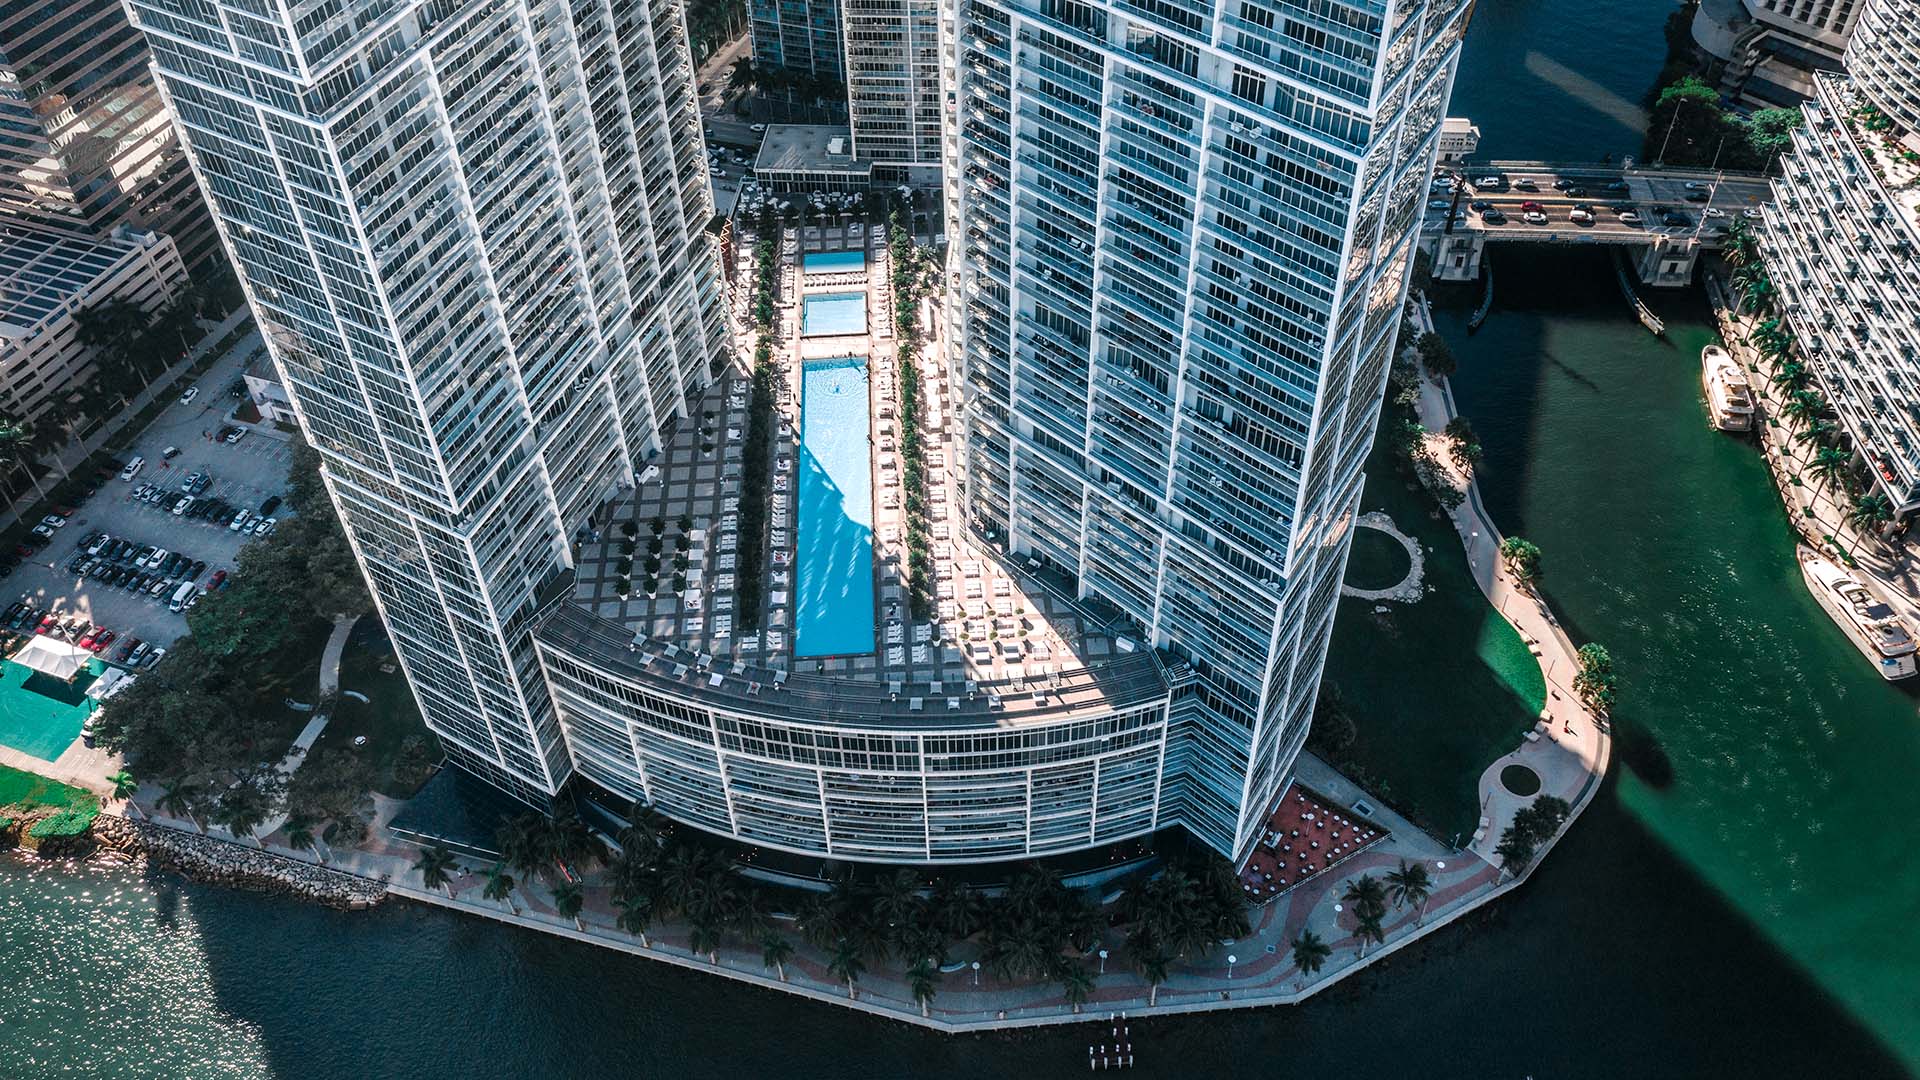 a wet deck pool in Miami